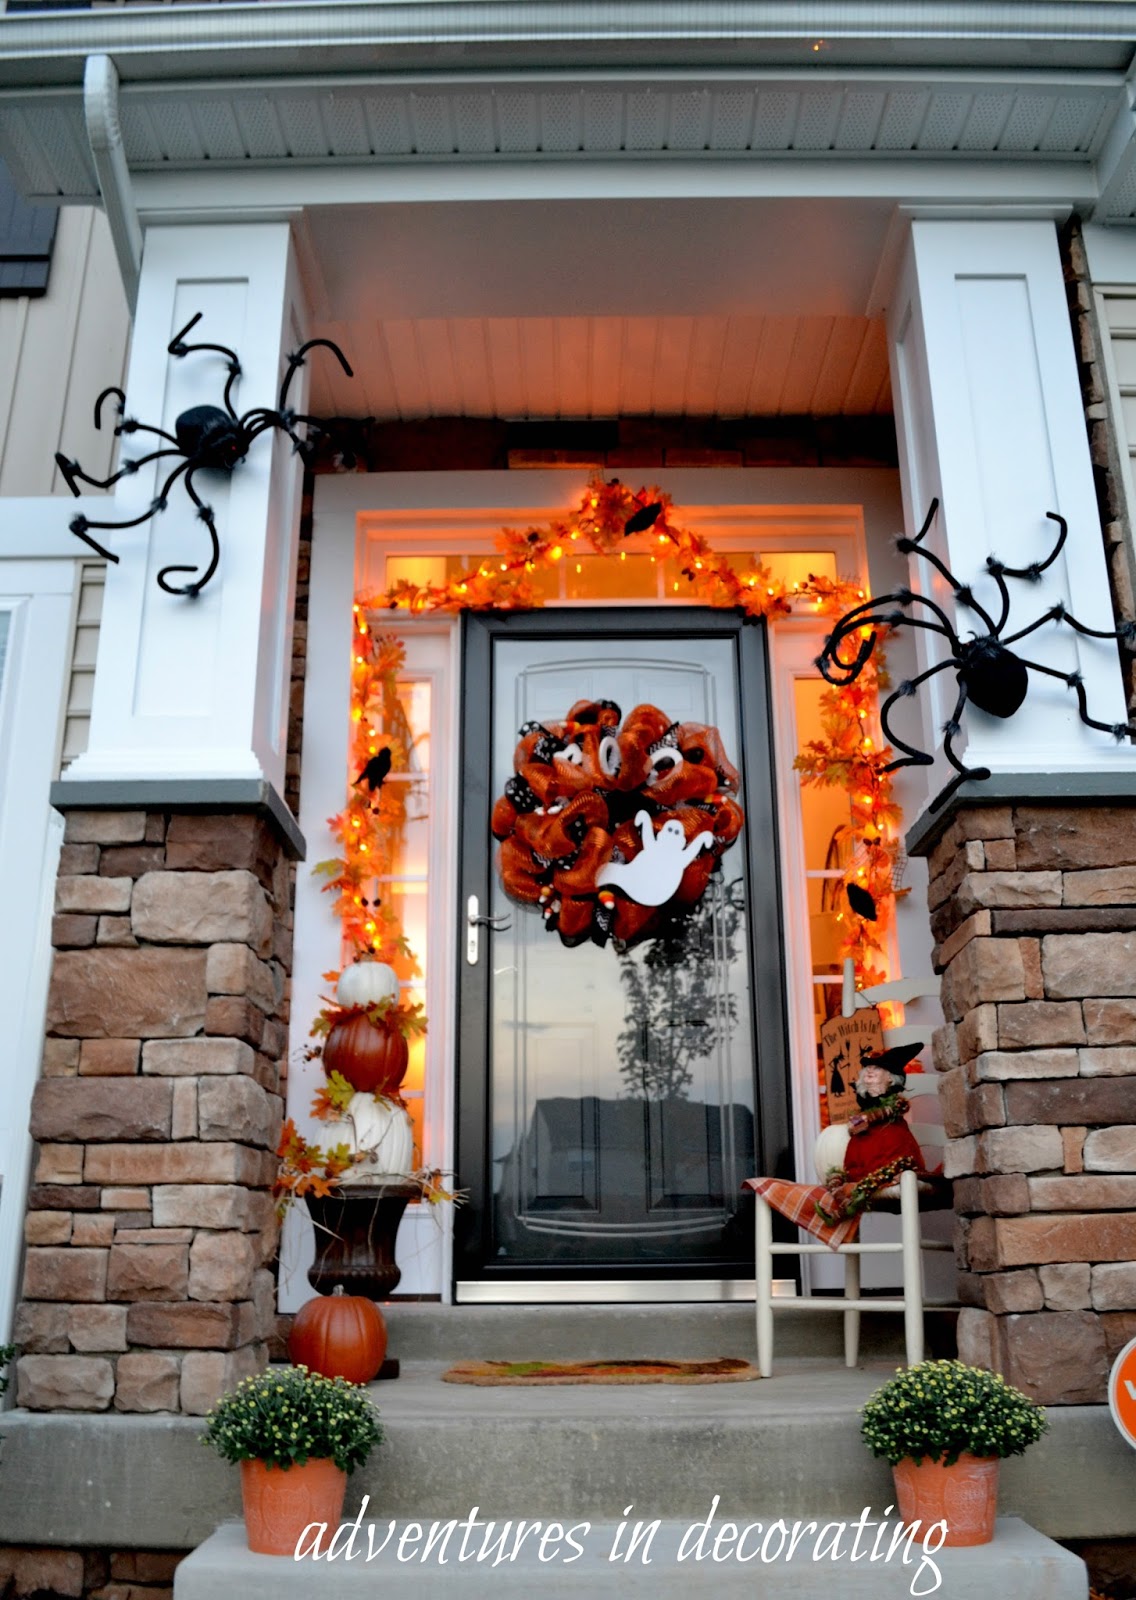 Adventures in Decorating: Our 2015 Fall Front Porch